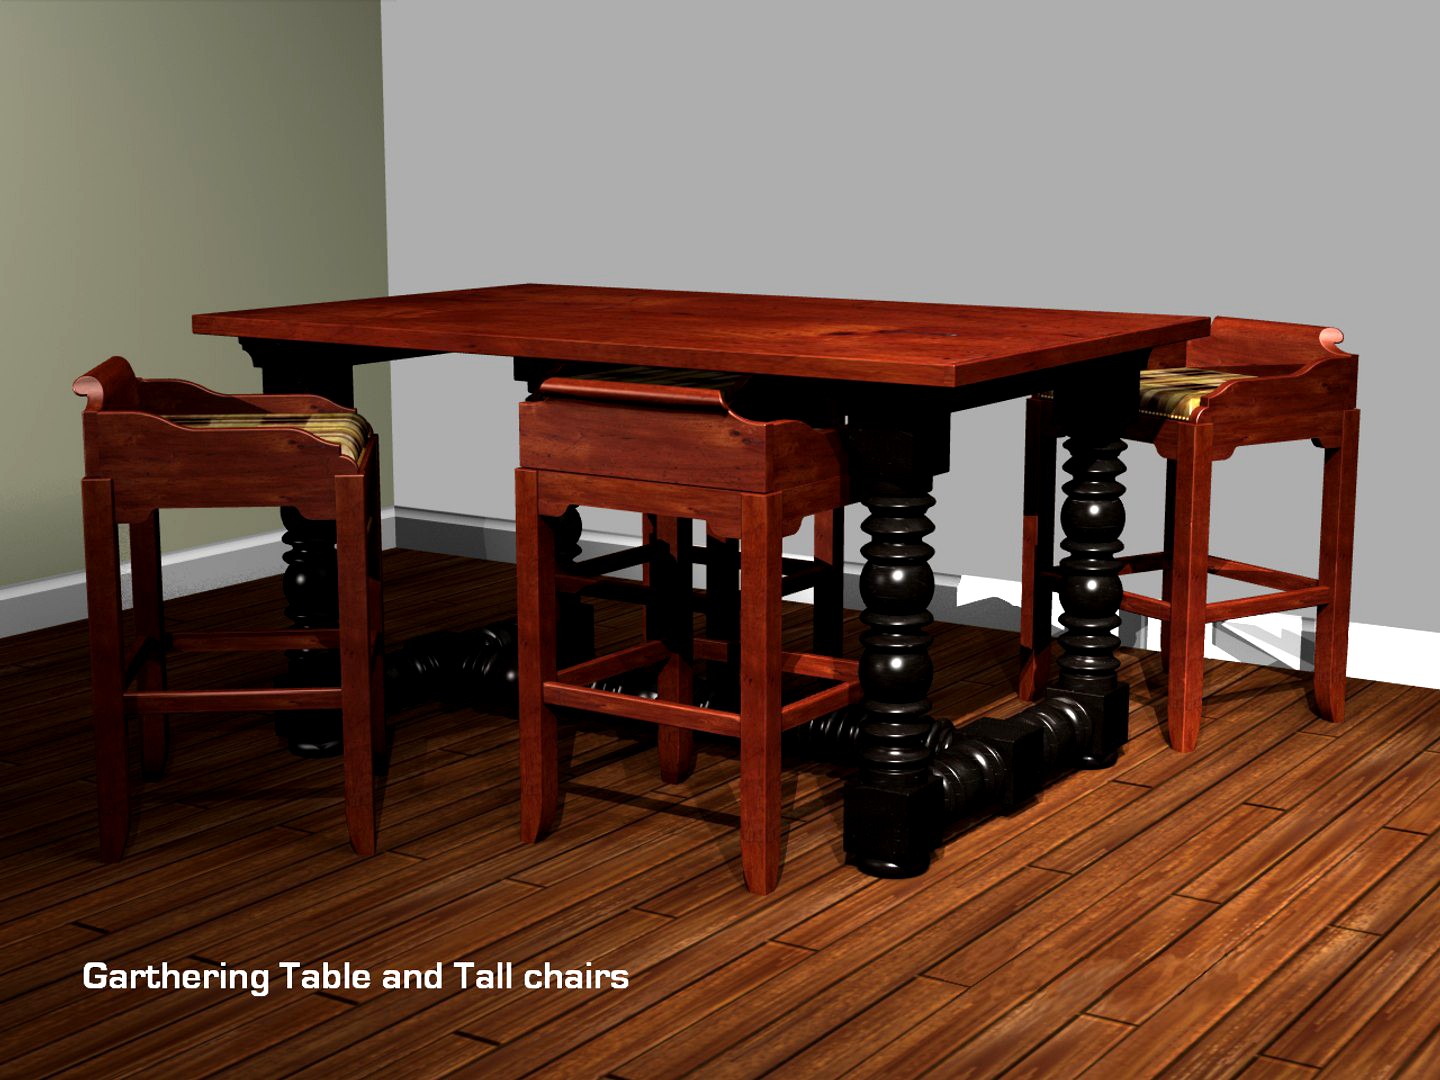 Gathering table and stools